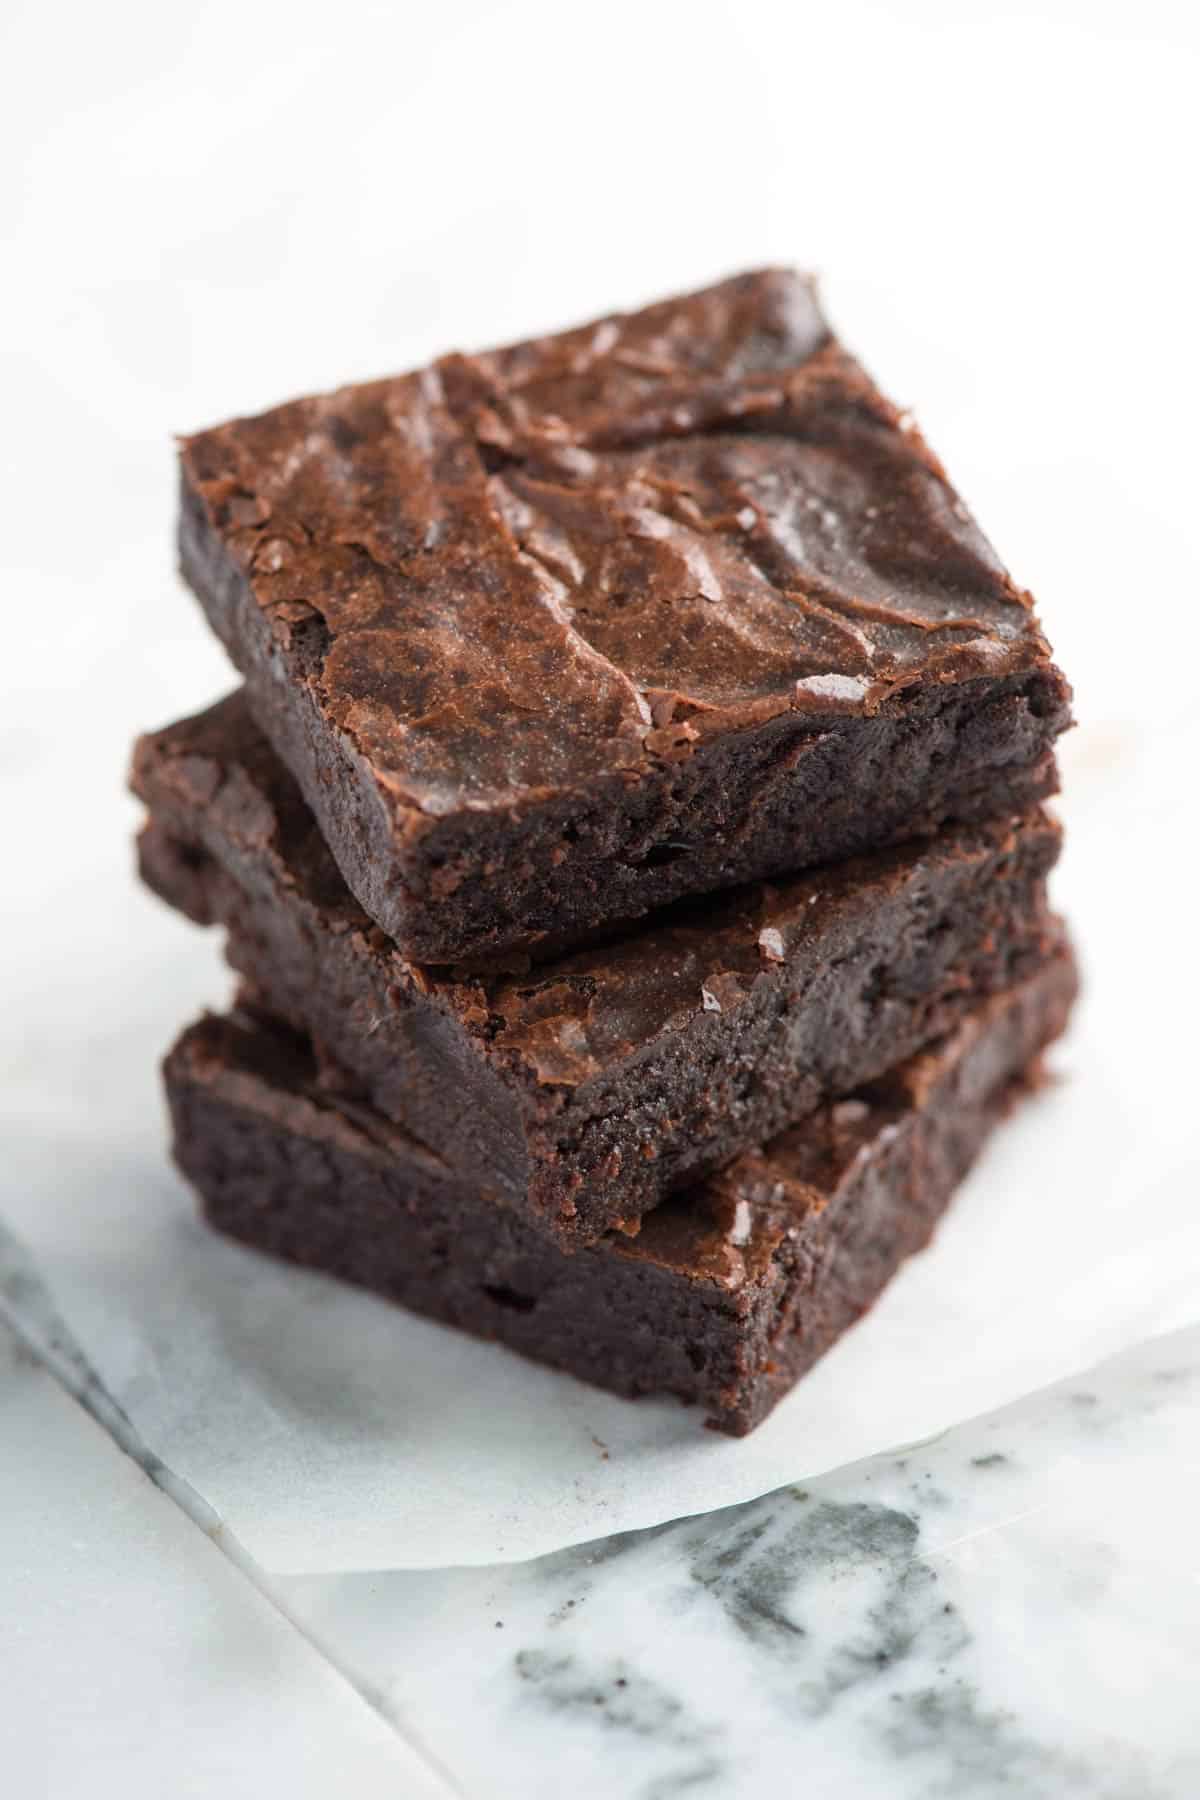 Fudgy brownies with crinkly tops